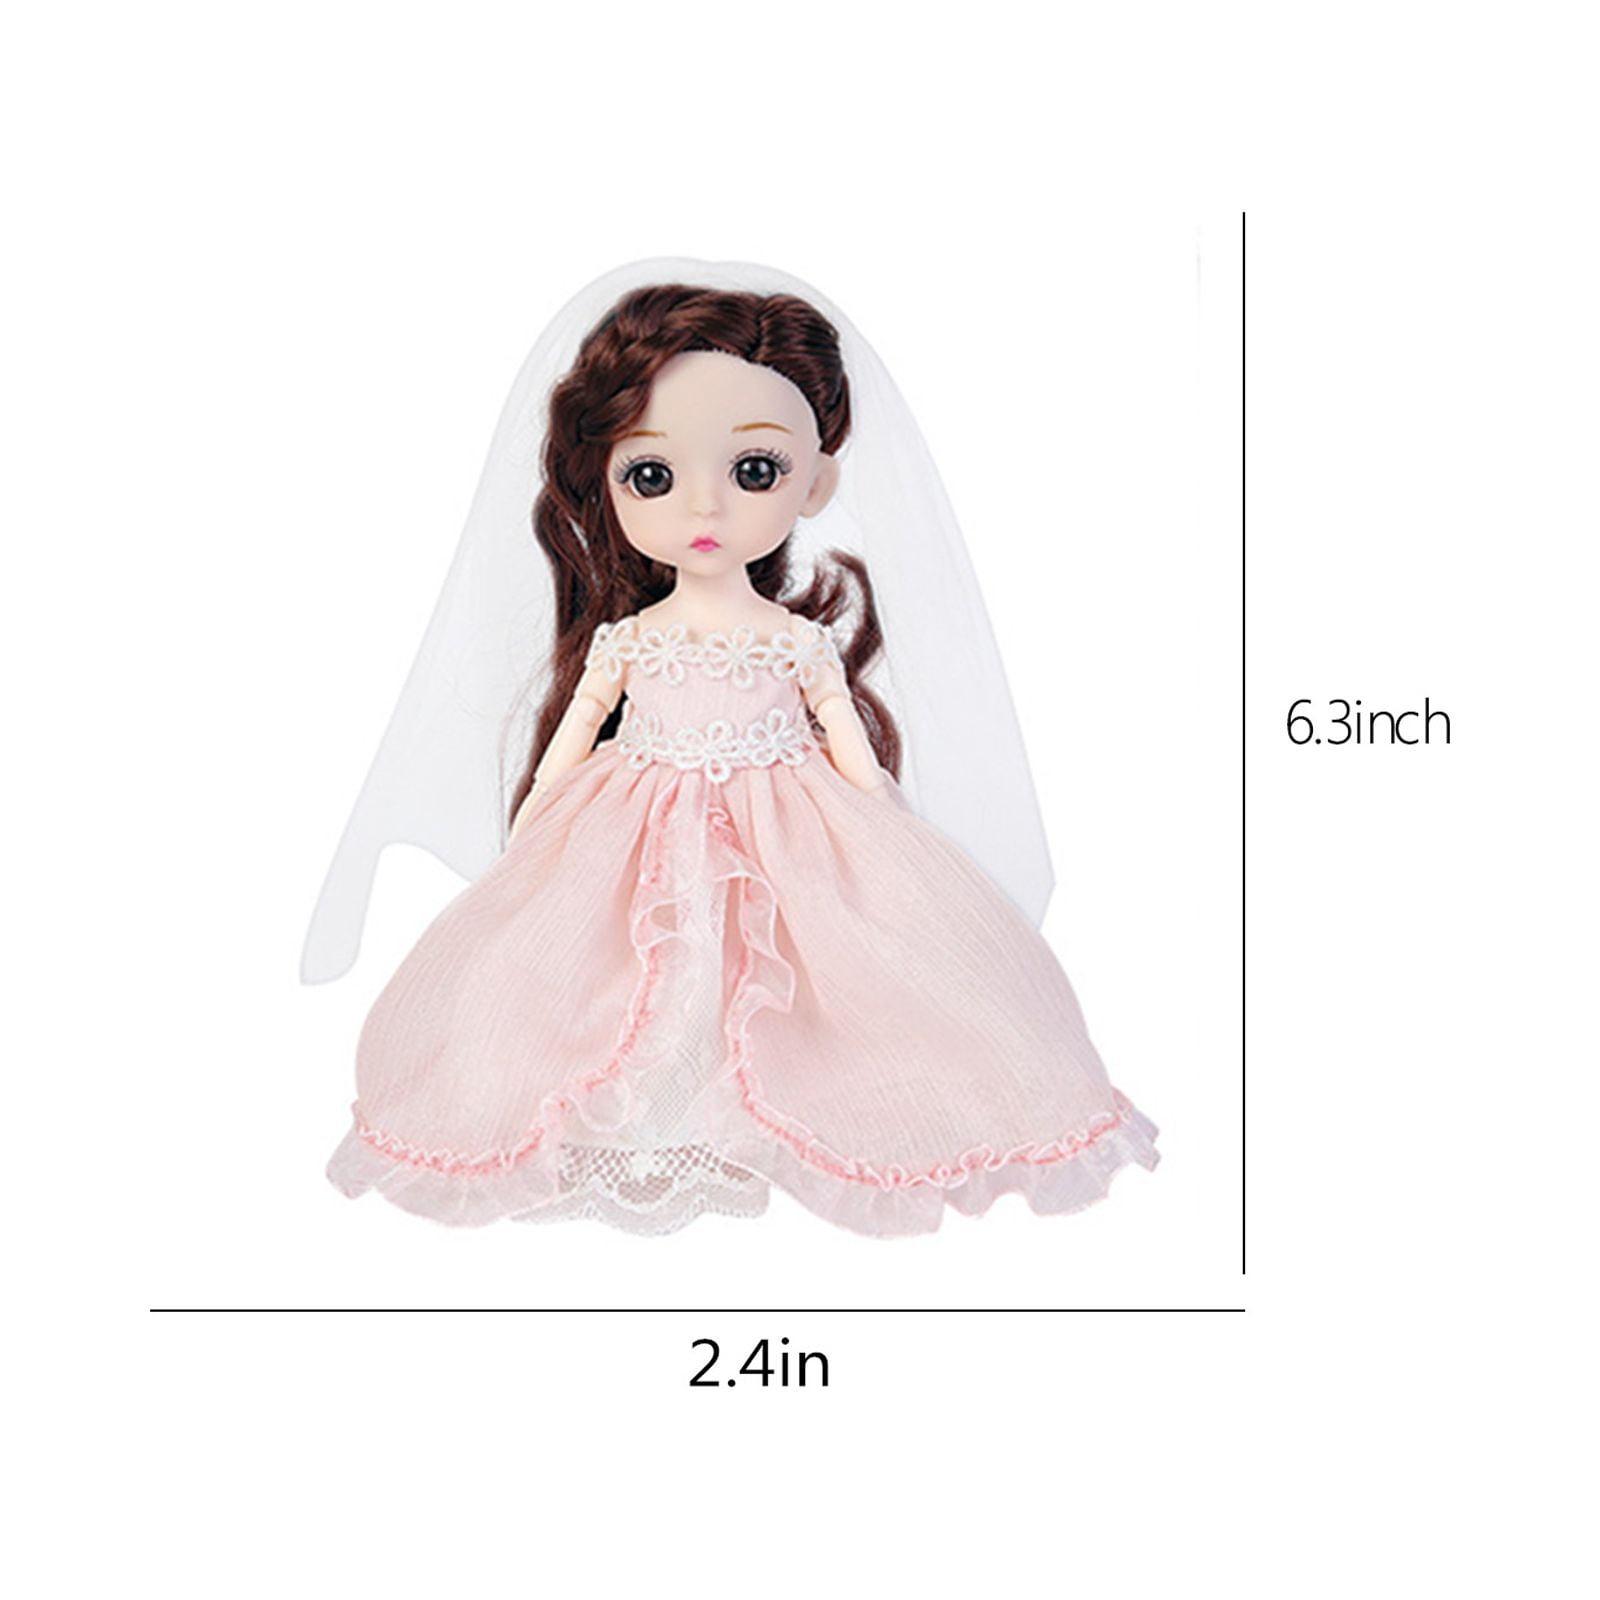 ball jointed doll cute